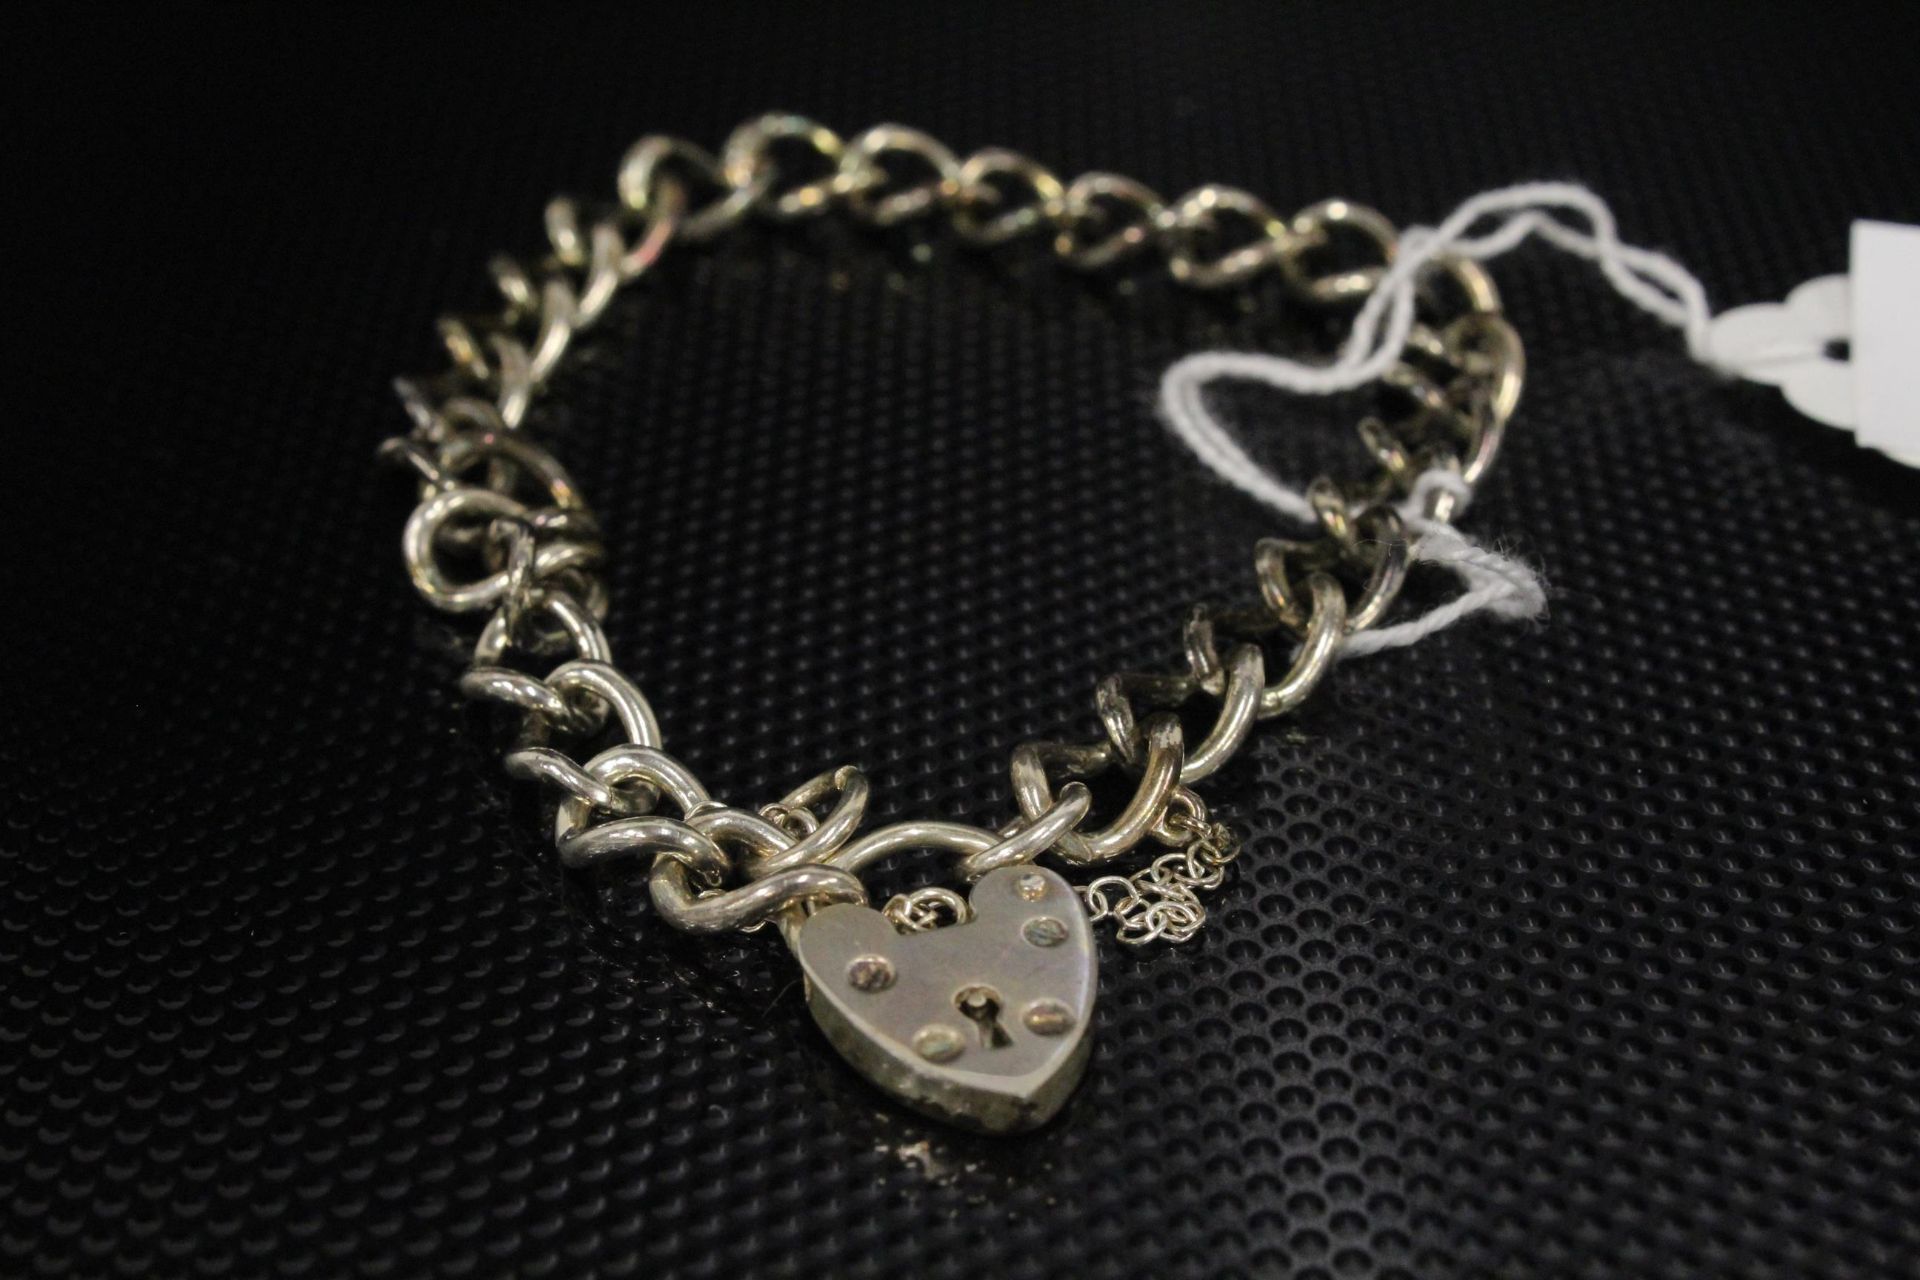 A · 925 Silver fancy link long Neck Chain 76cm and a Silver (?) Chain Bracelet with a heart shape - Image 2 of 4